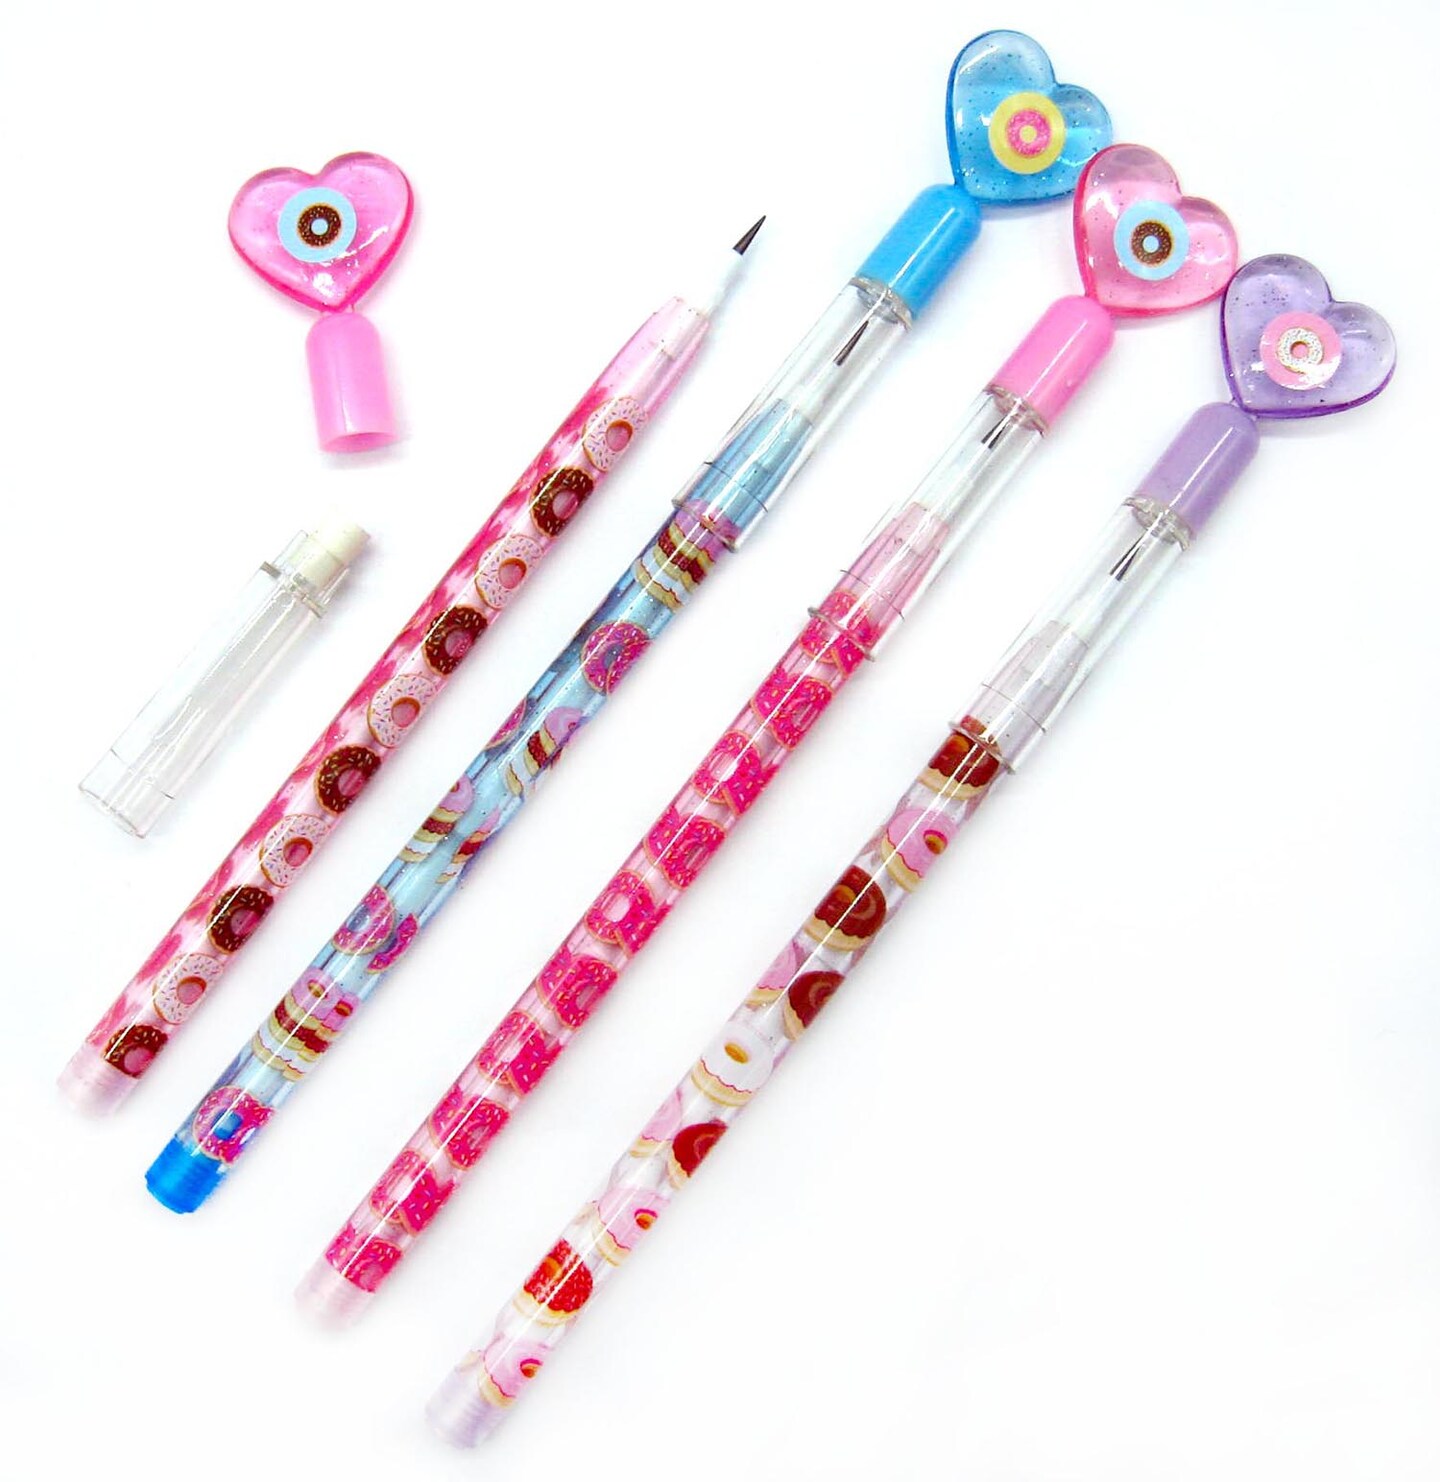 Donuts Multi-Point Pencils - 6 Pcs Pack